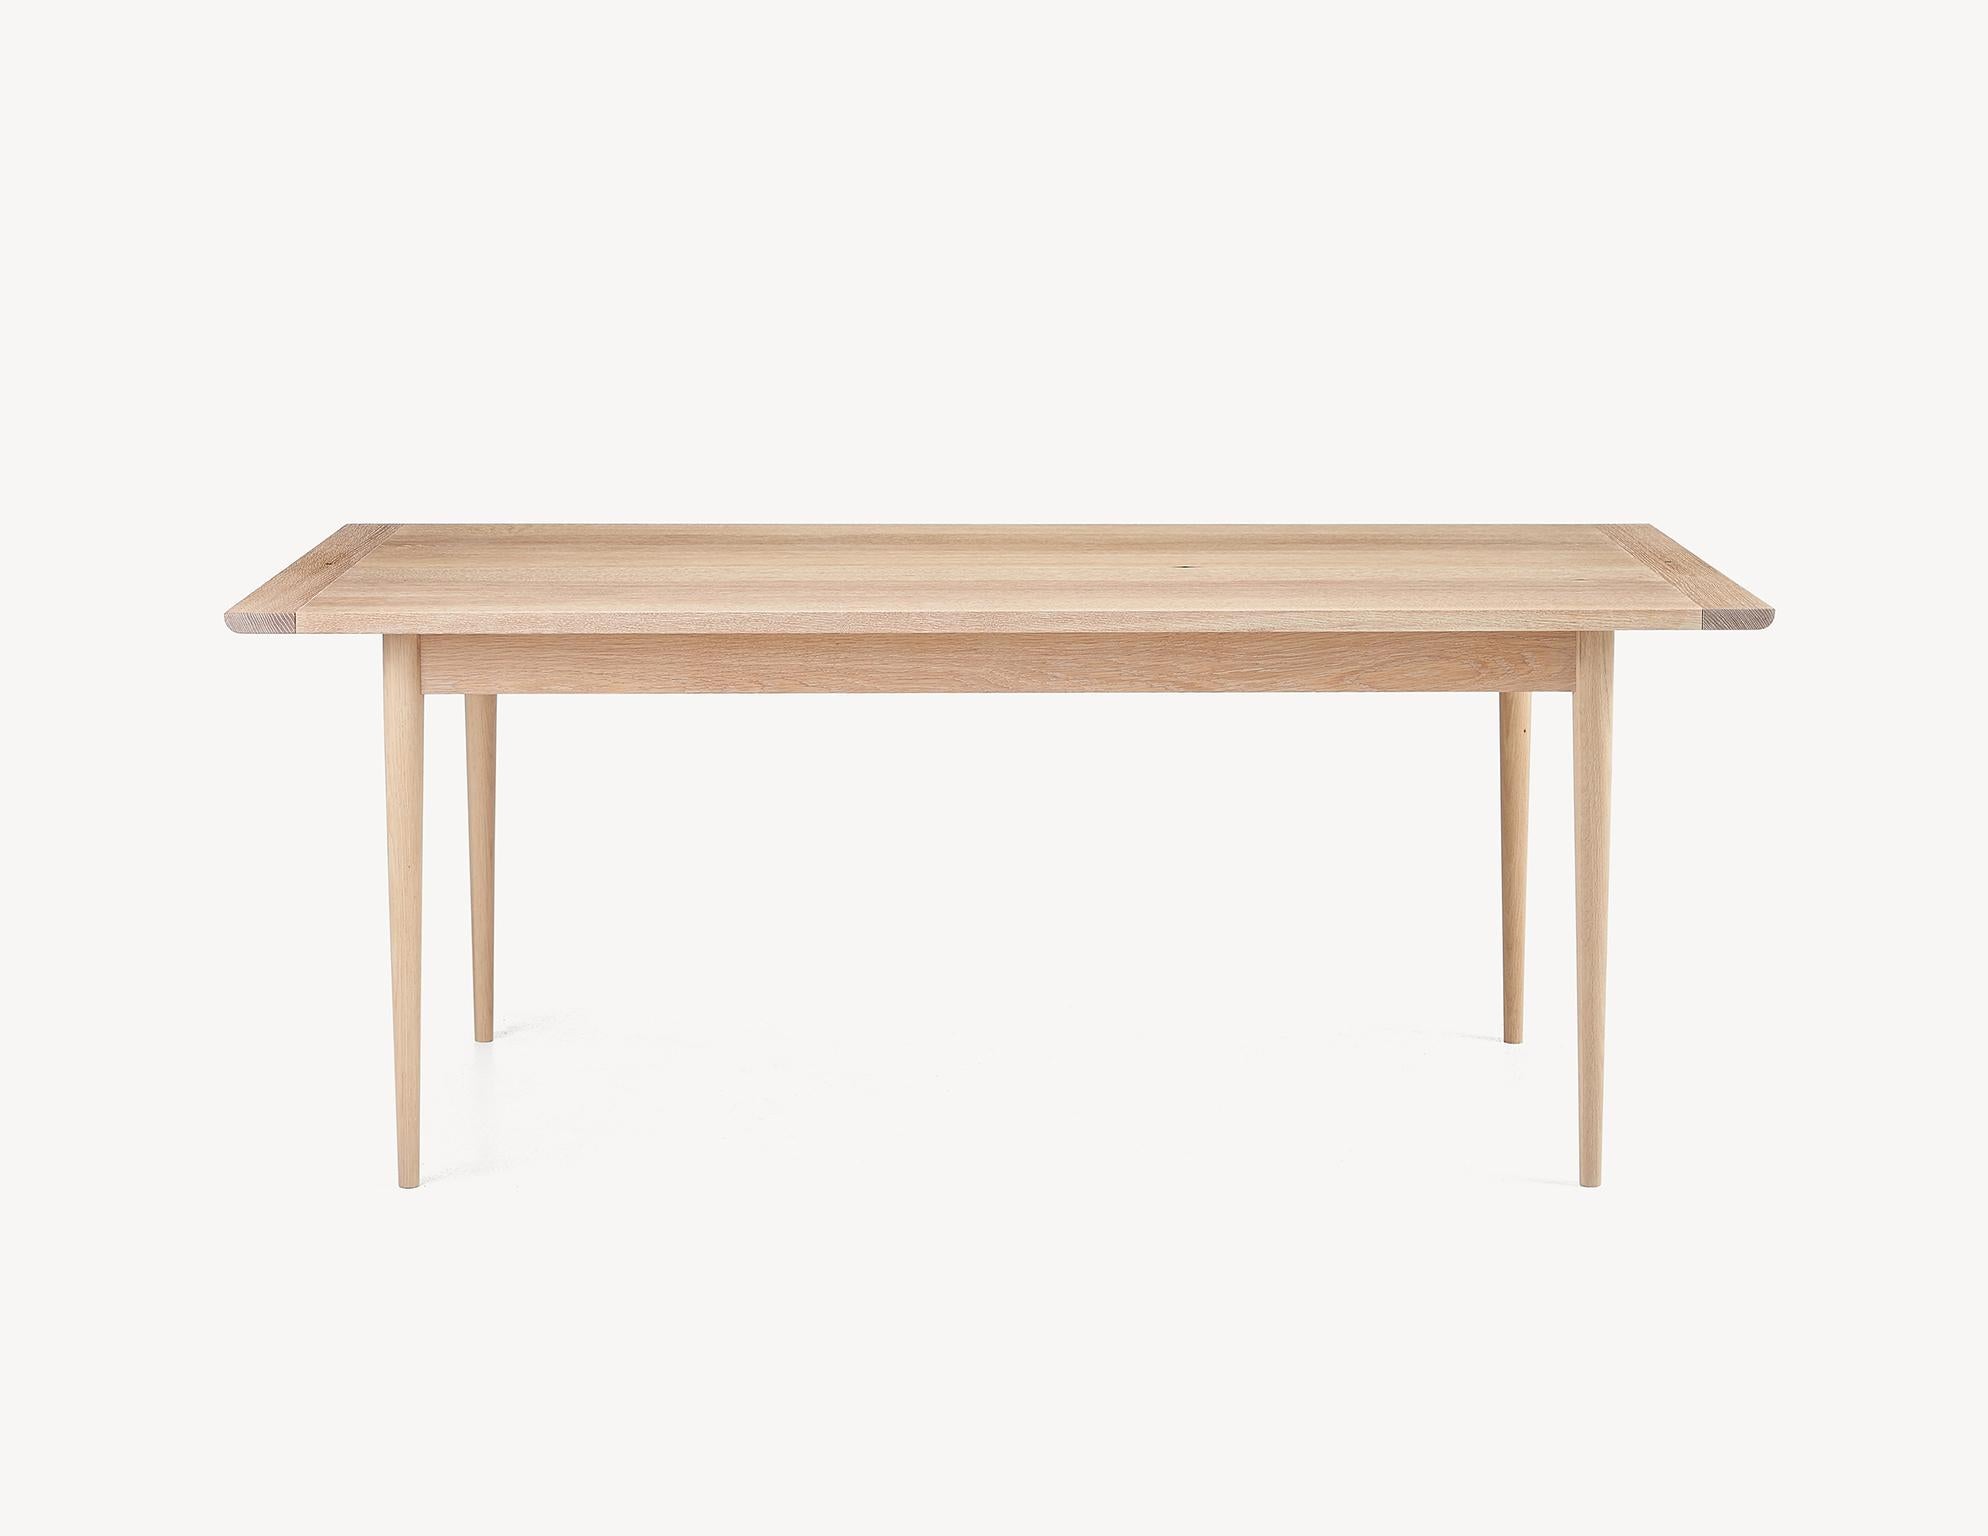 Canadian Contemporary Black Dining Table in Solid Oak by Coolican & Company (36